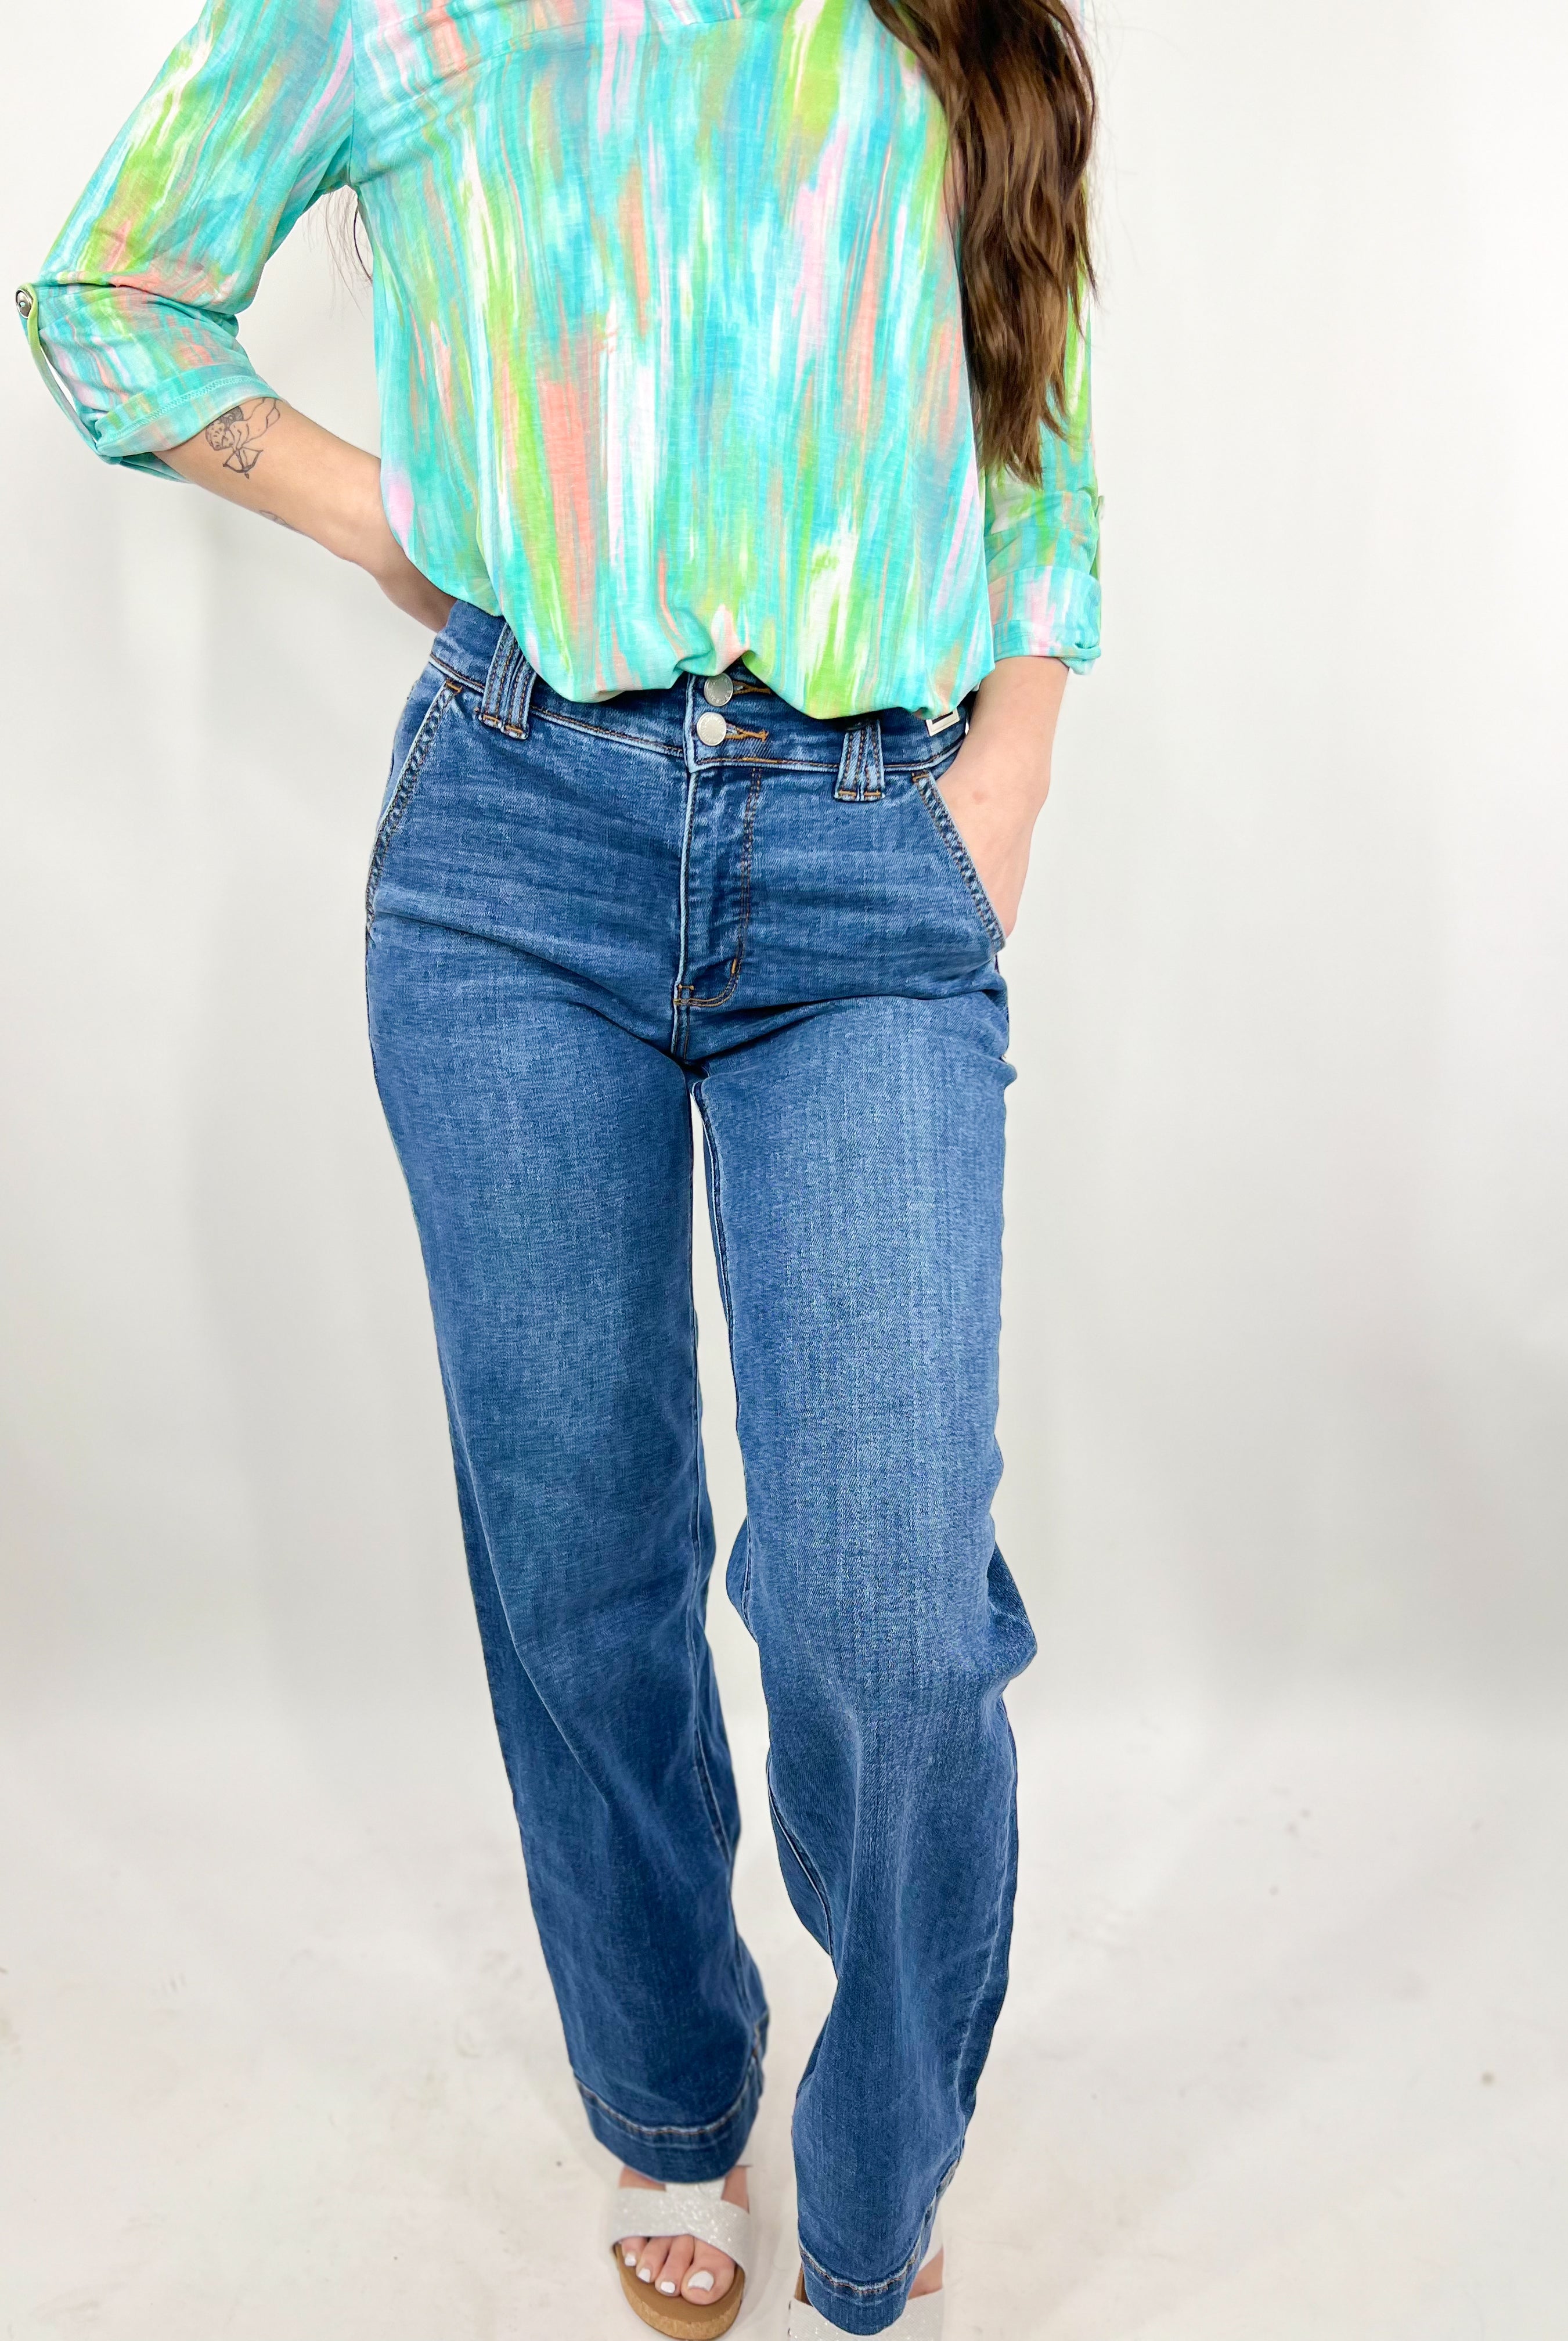 RESTOCK: Double Trouble Trouser Wide Leg Jean by Judy Blue-190 Jeans-Judy Blue-Heathered Boho Boutique, Women's Fashion and Accessories in Palmetto, FL